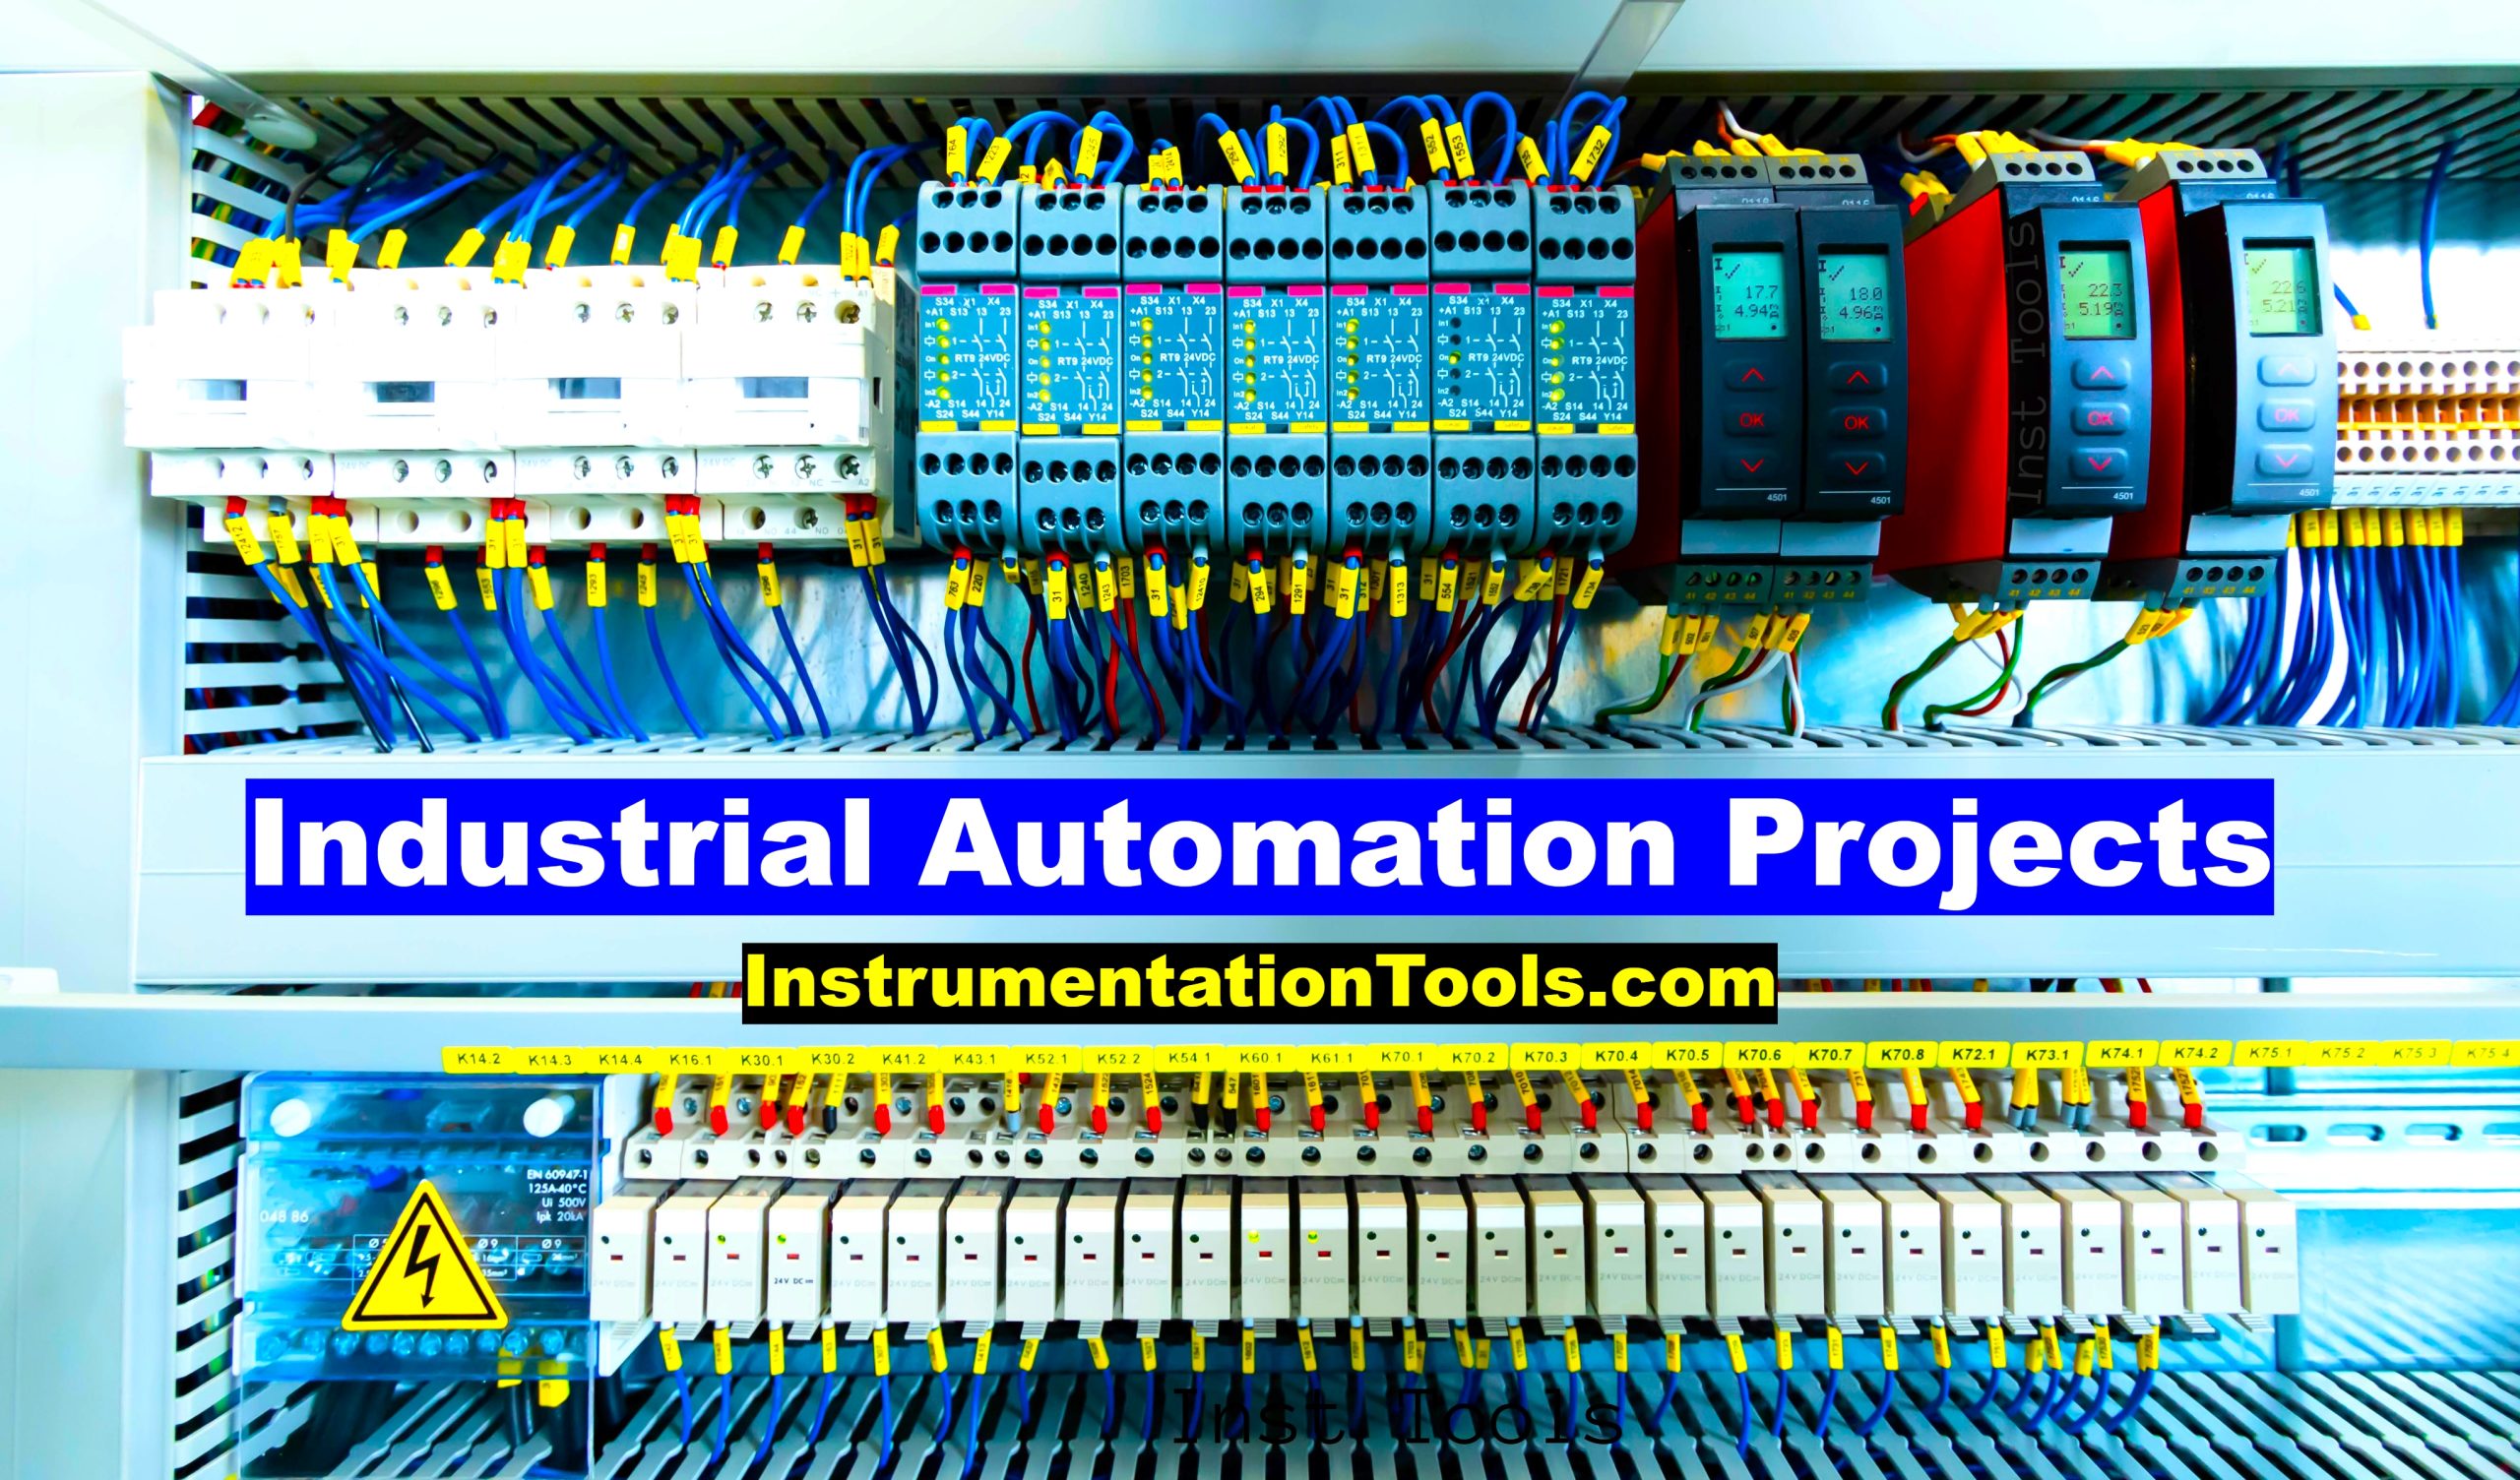 Industrial Automation Projects